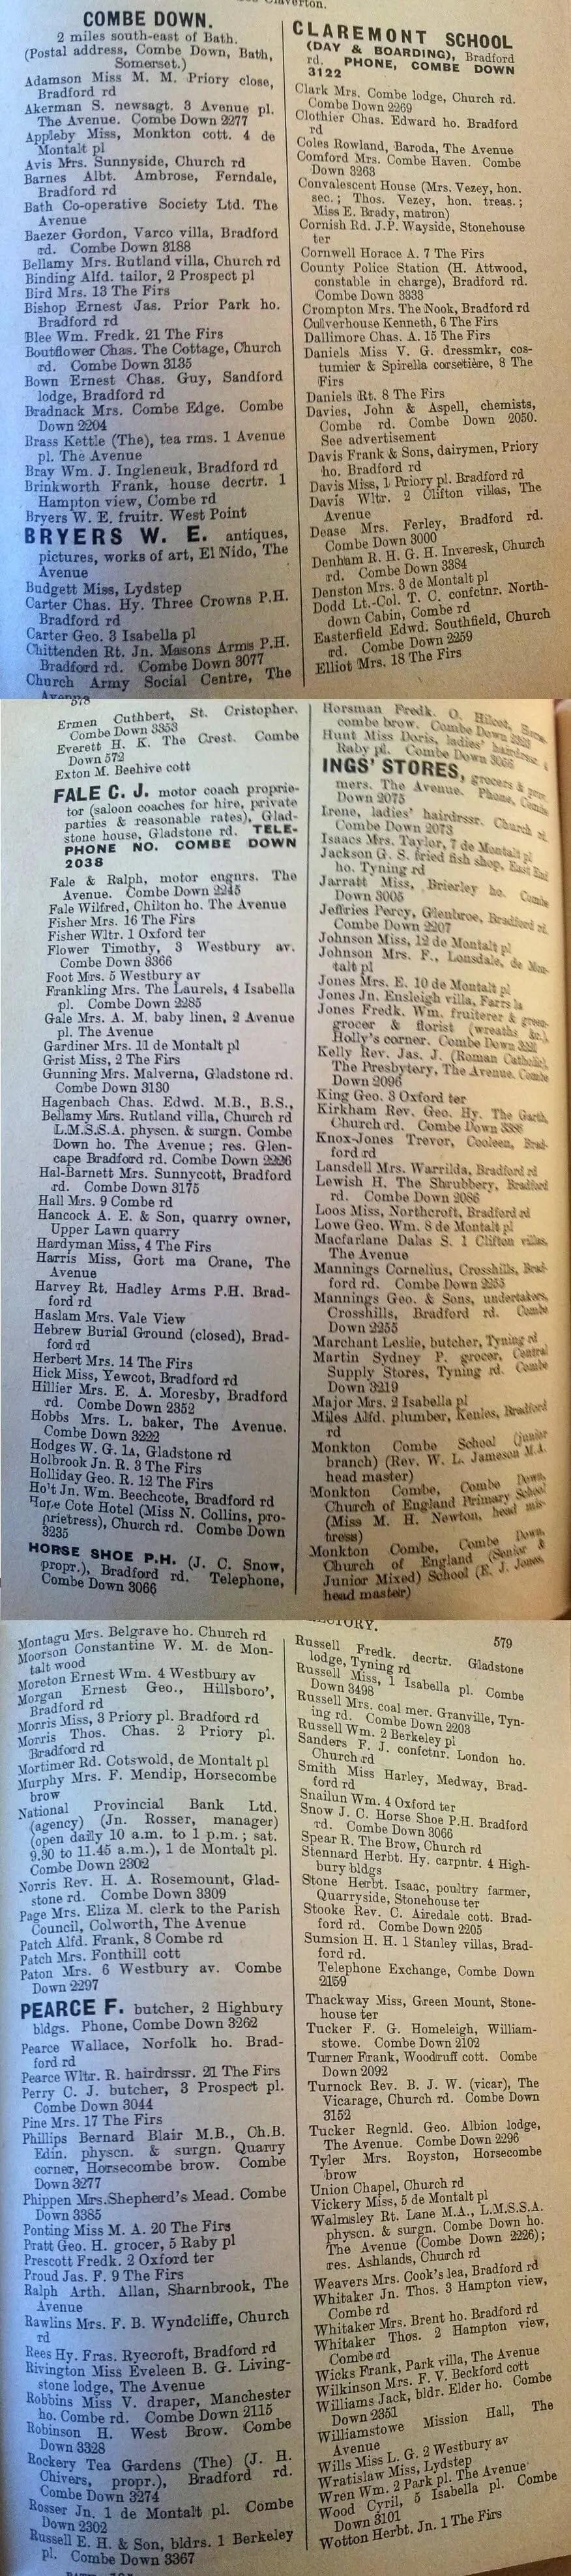 1947 post office directory for combe down